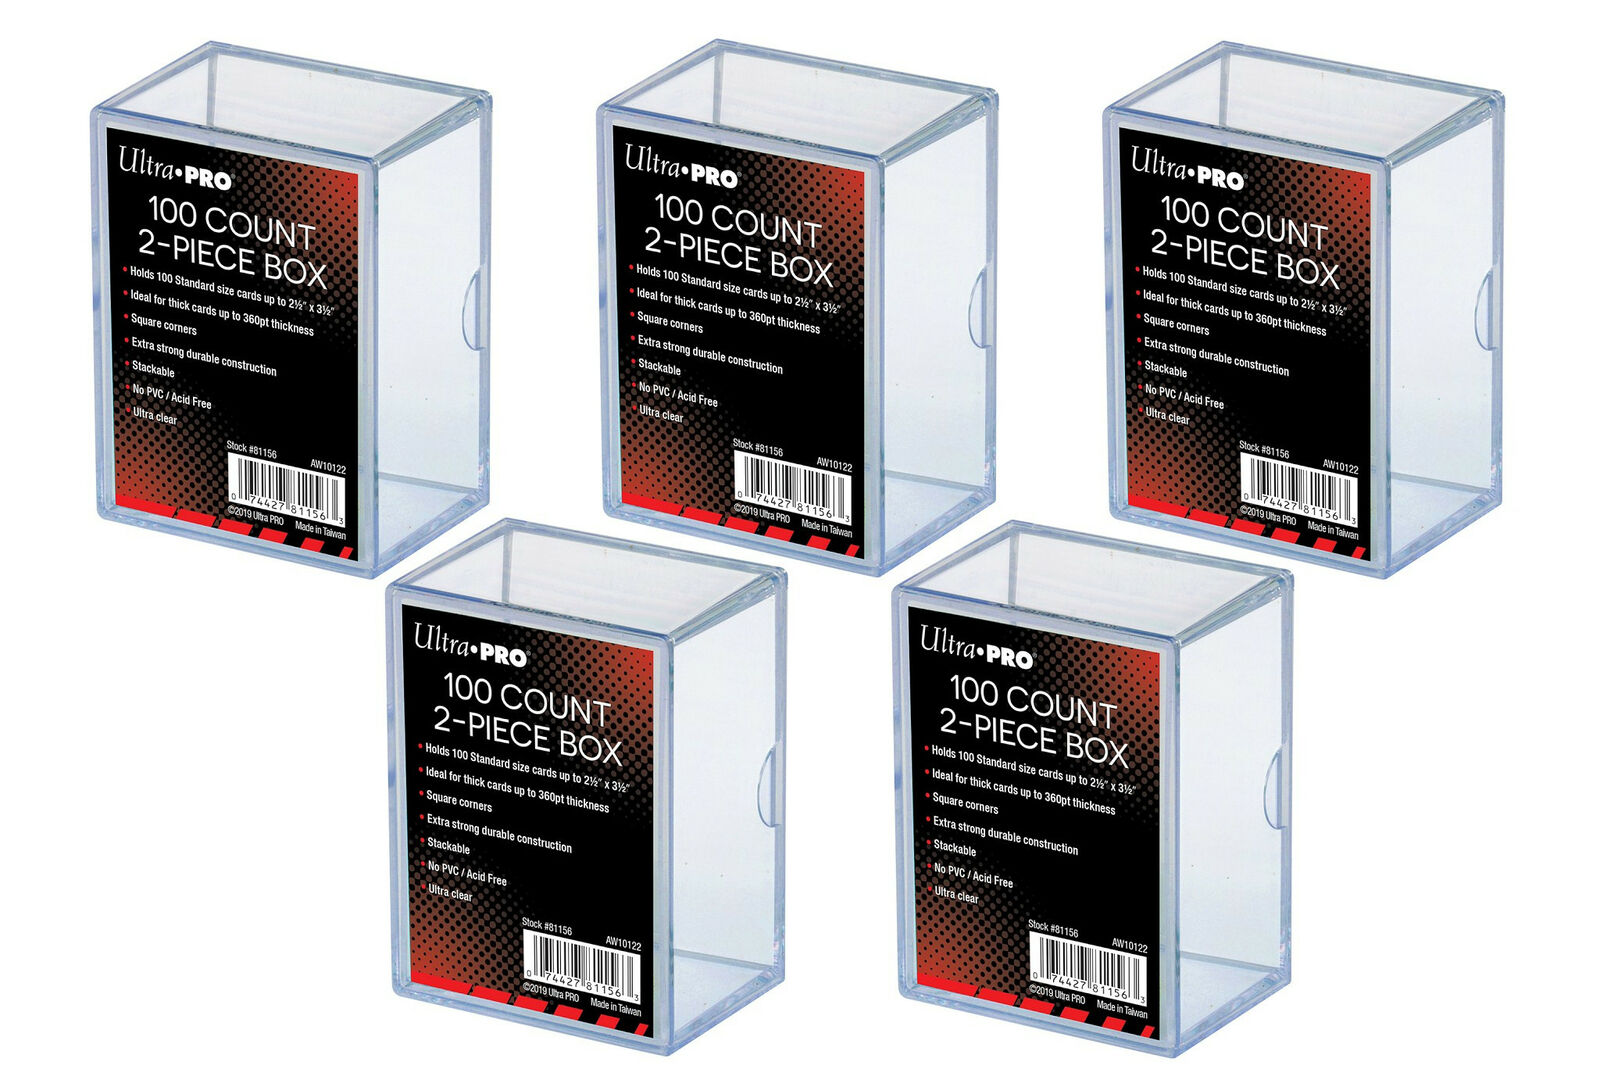 NEW 5-PACK Ultra Pro 100 Count 2-Piece Card Storage Box Case Sports Gaming MTG